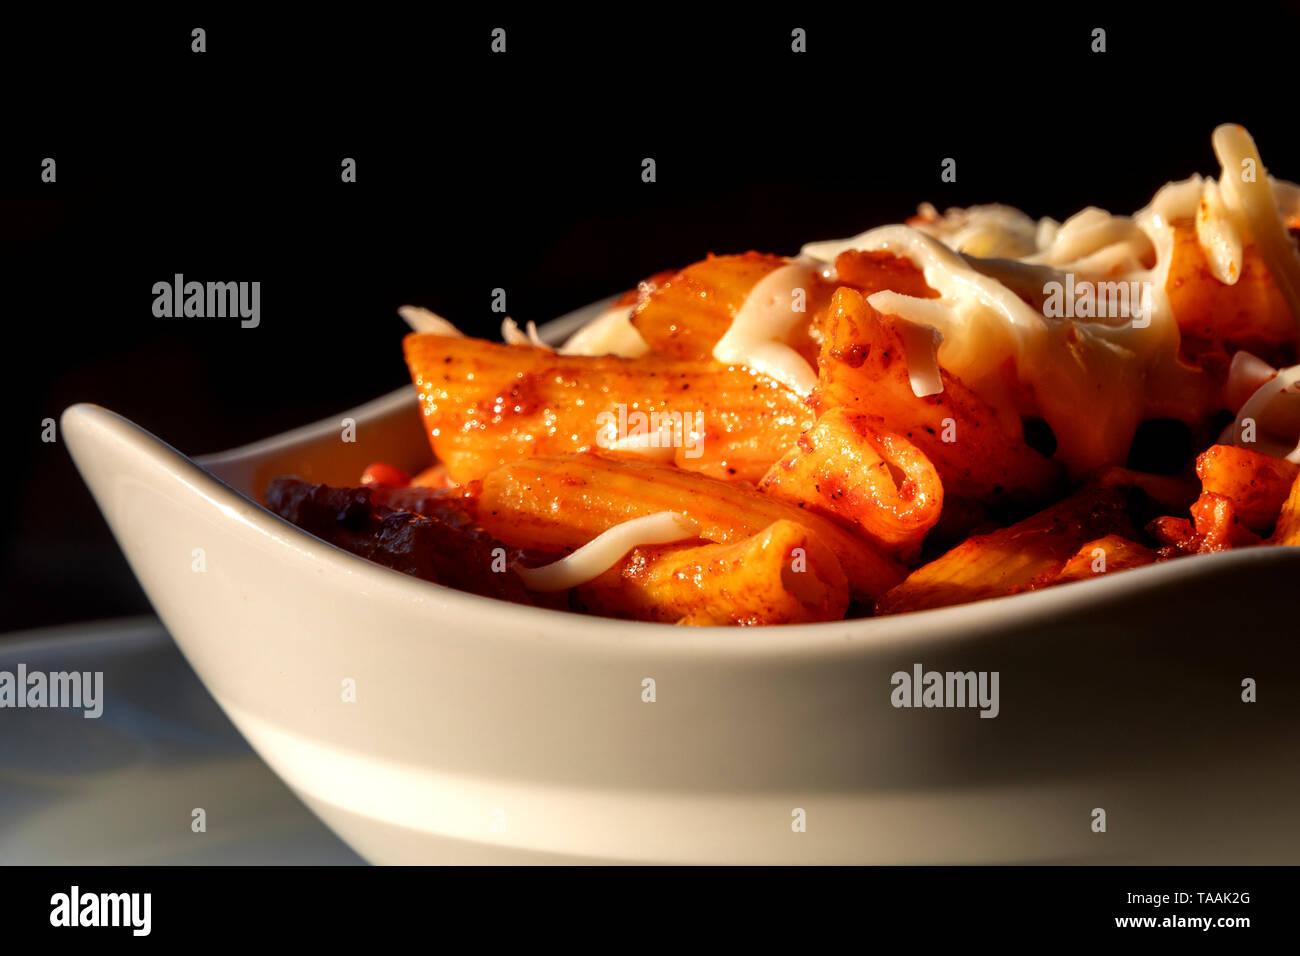 Pasta with tomato sauce and cheese Stock Photo